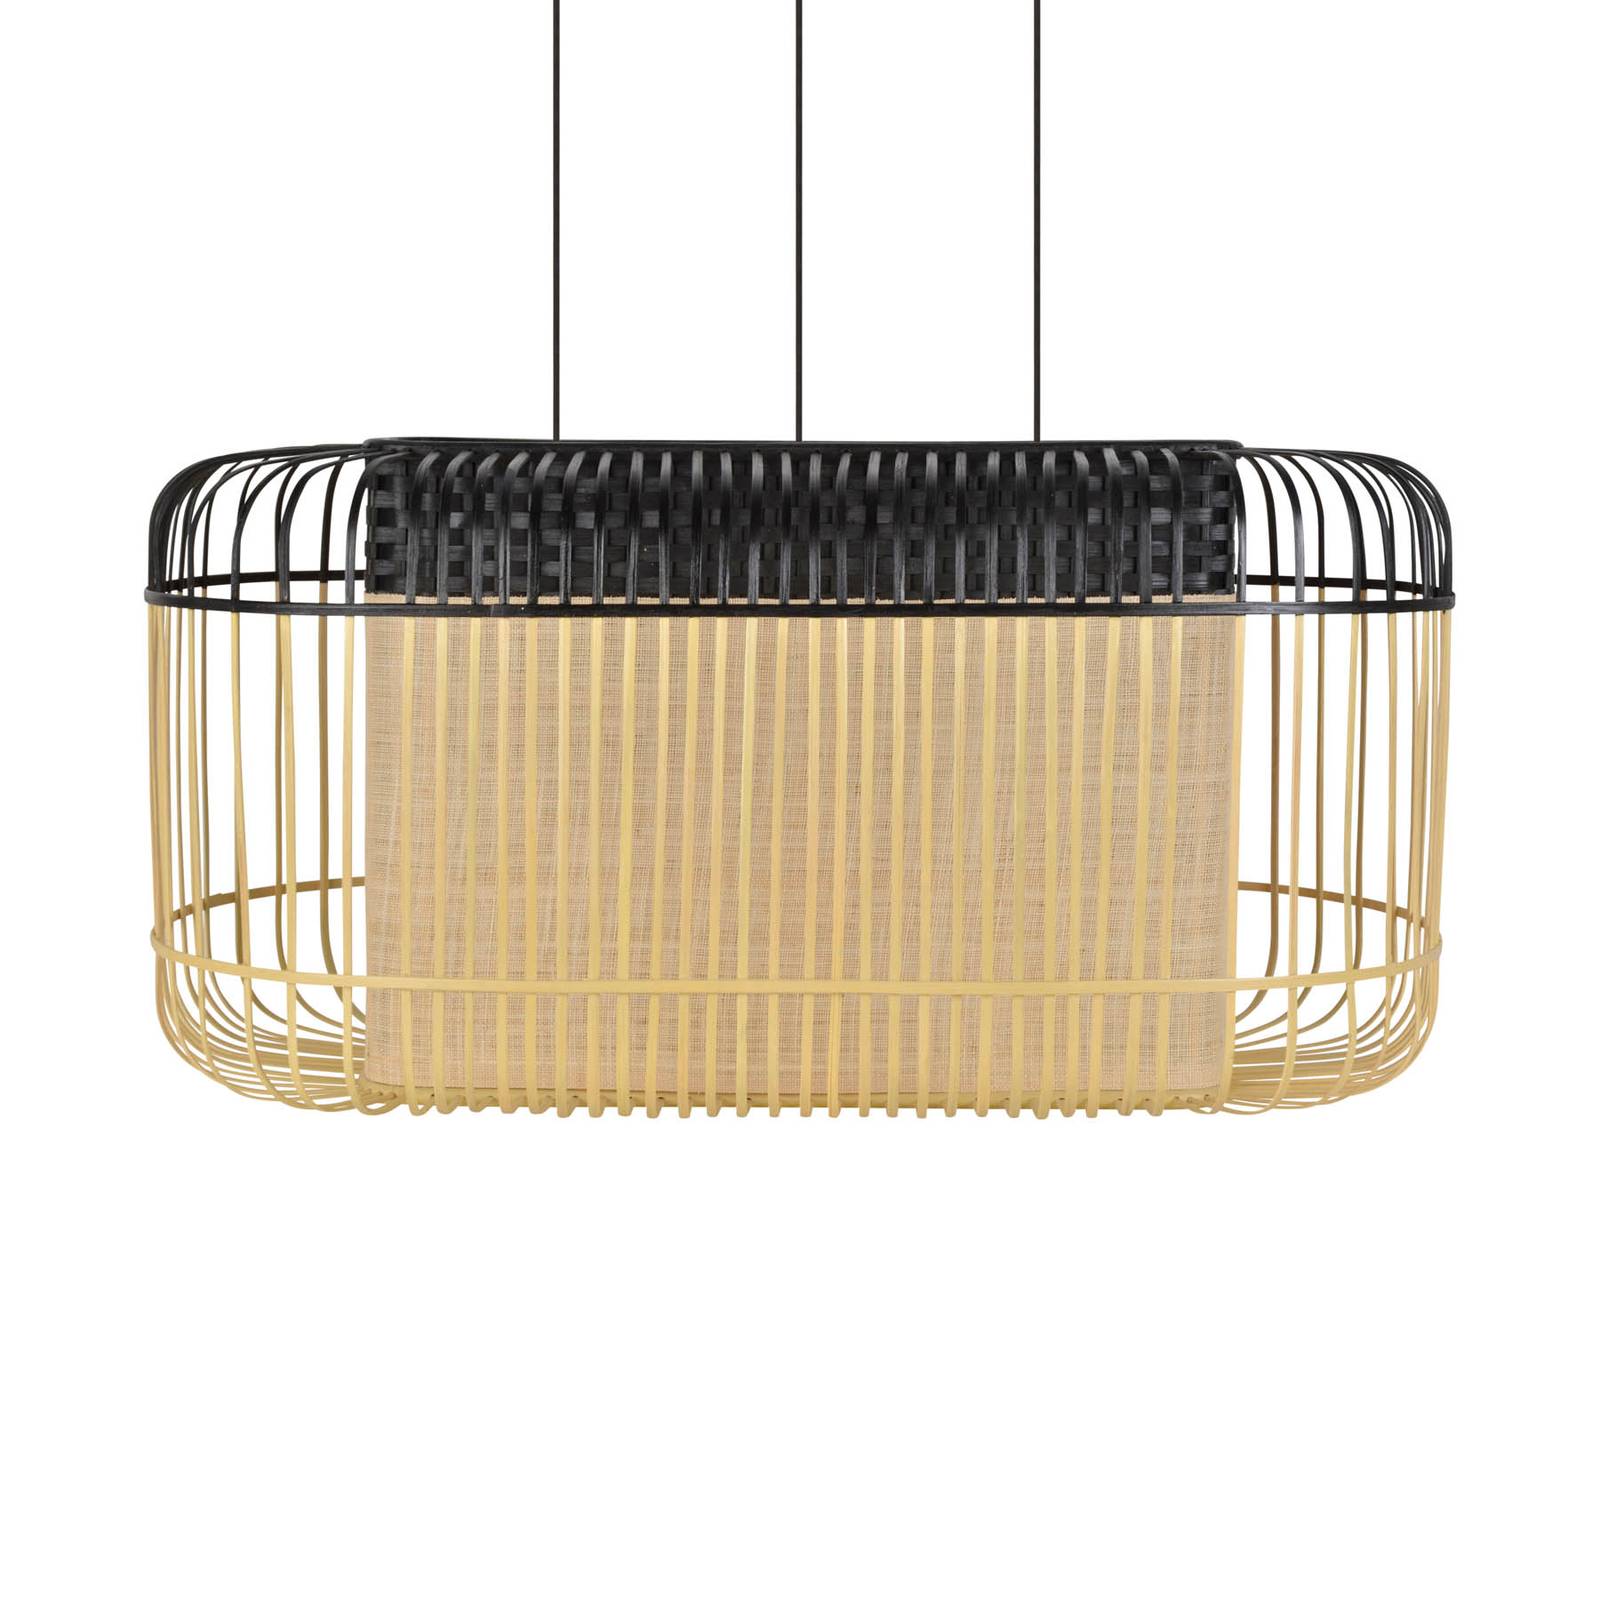 Image of Forestier Bamboo oval XL Suspension noir/naturel 3700663920383